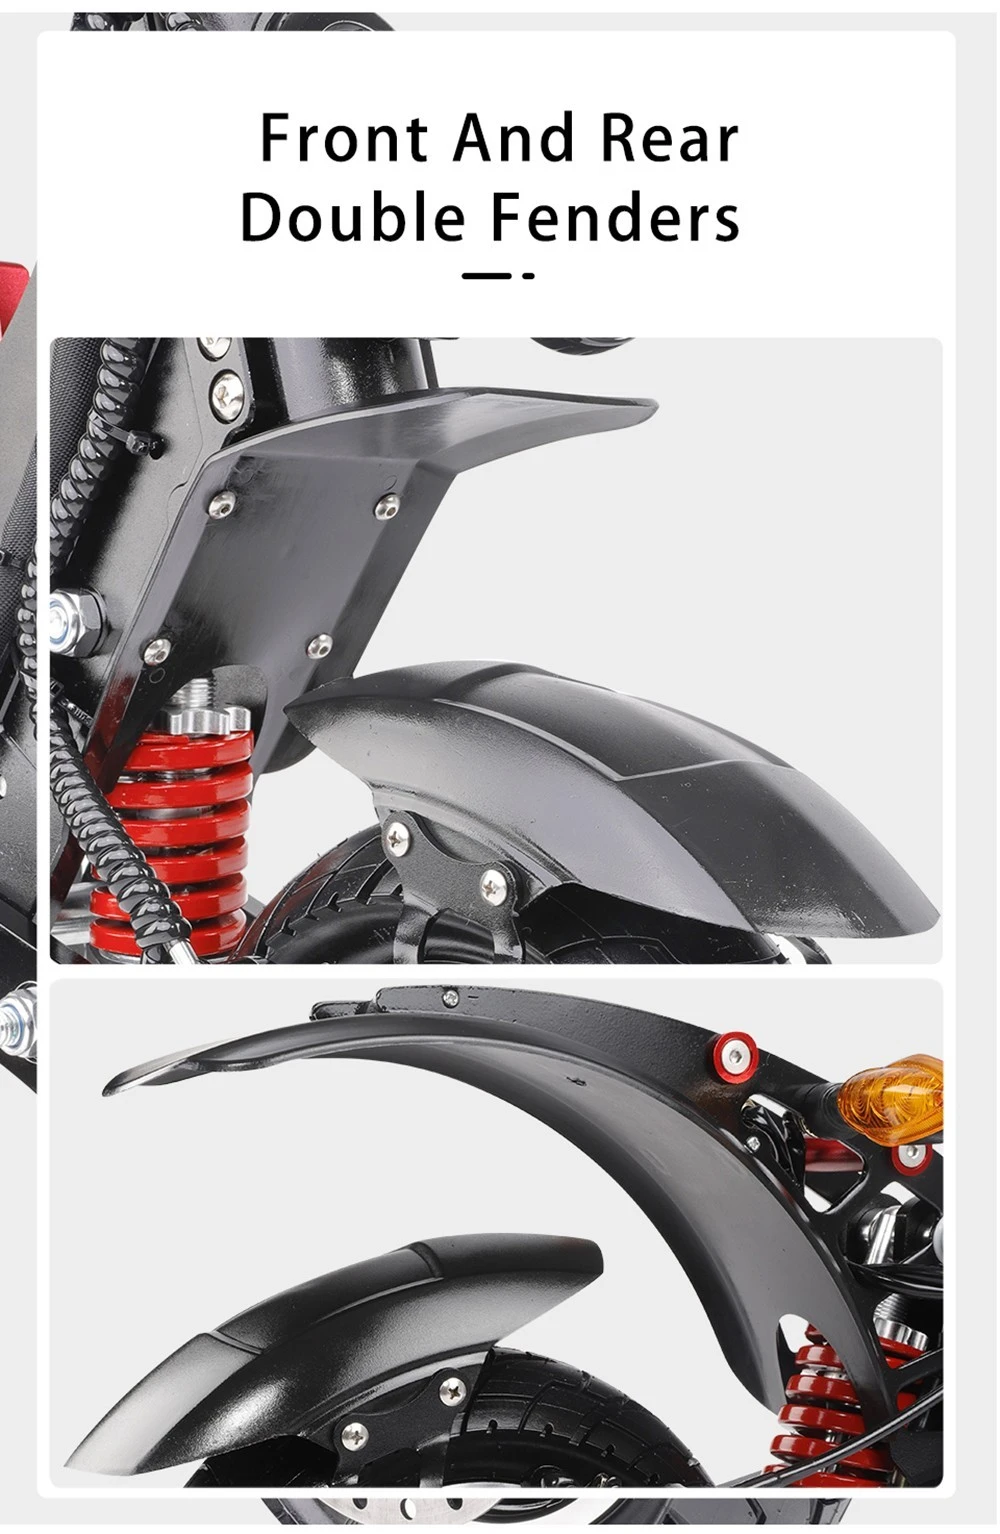 https://img.gkbcdn.com/d/202308/Halo-Knight-T108-Electric-Scooter-10-inch-Road-Tires-521959-11._p1_.jpg